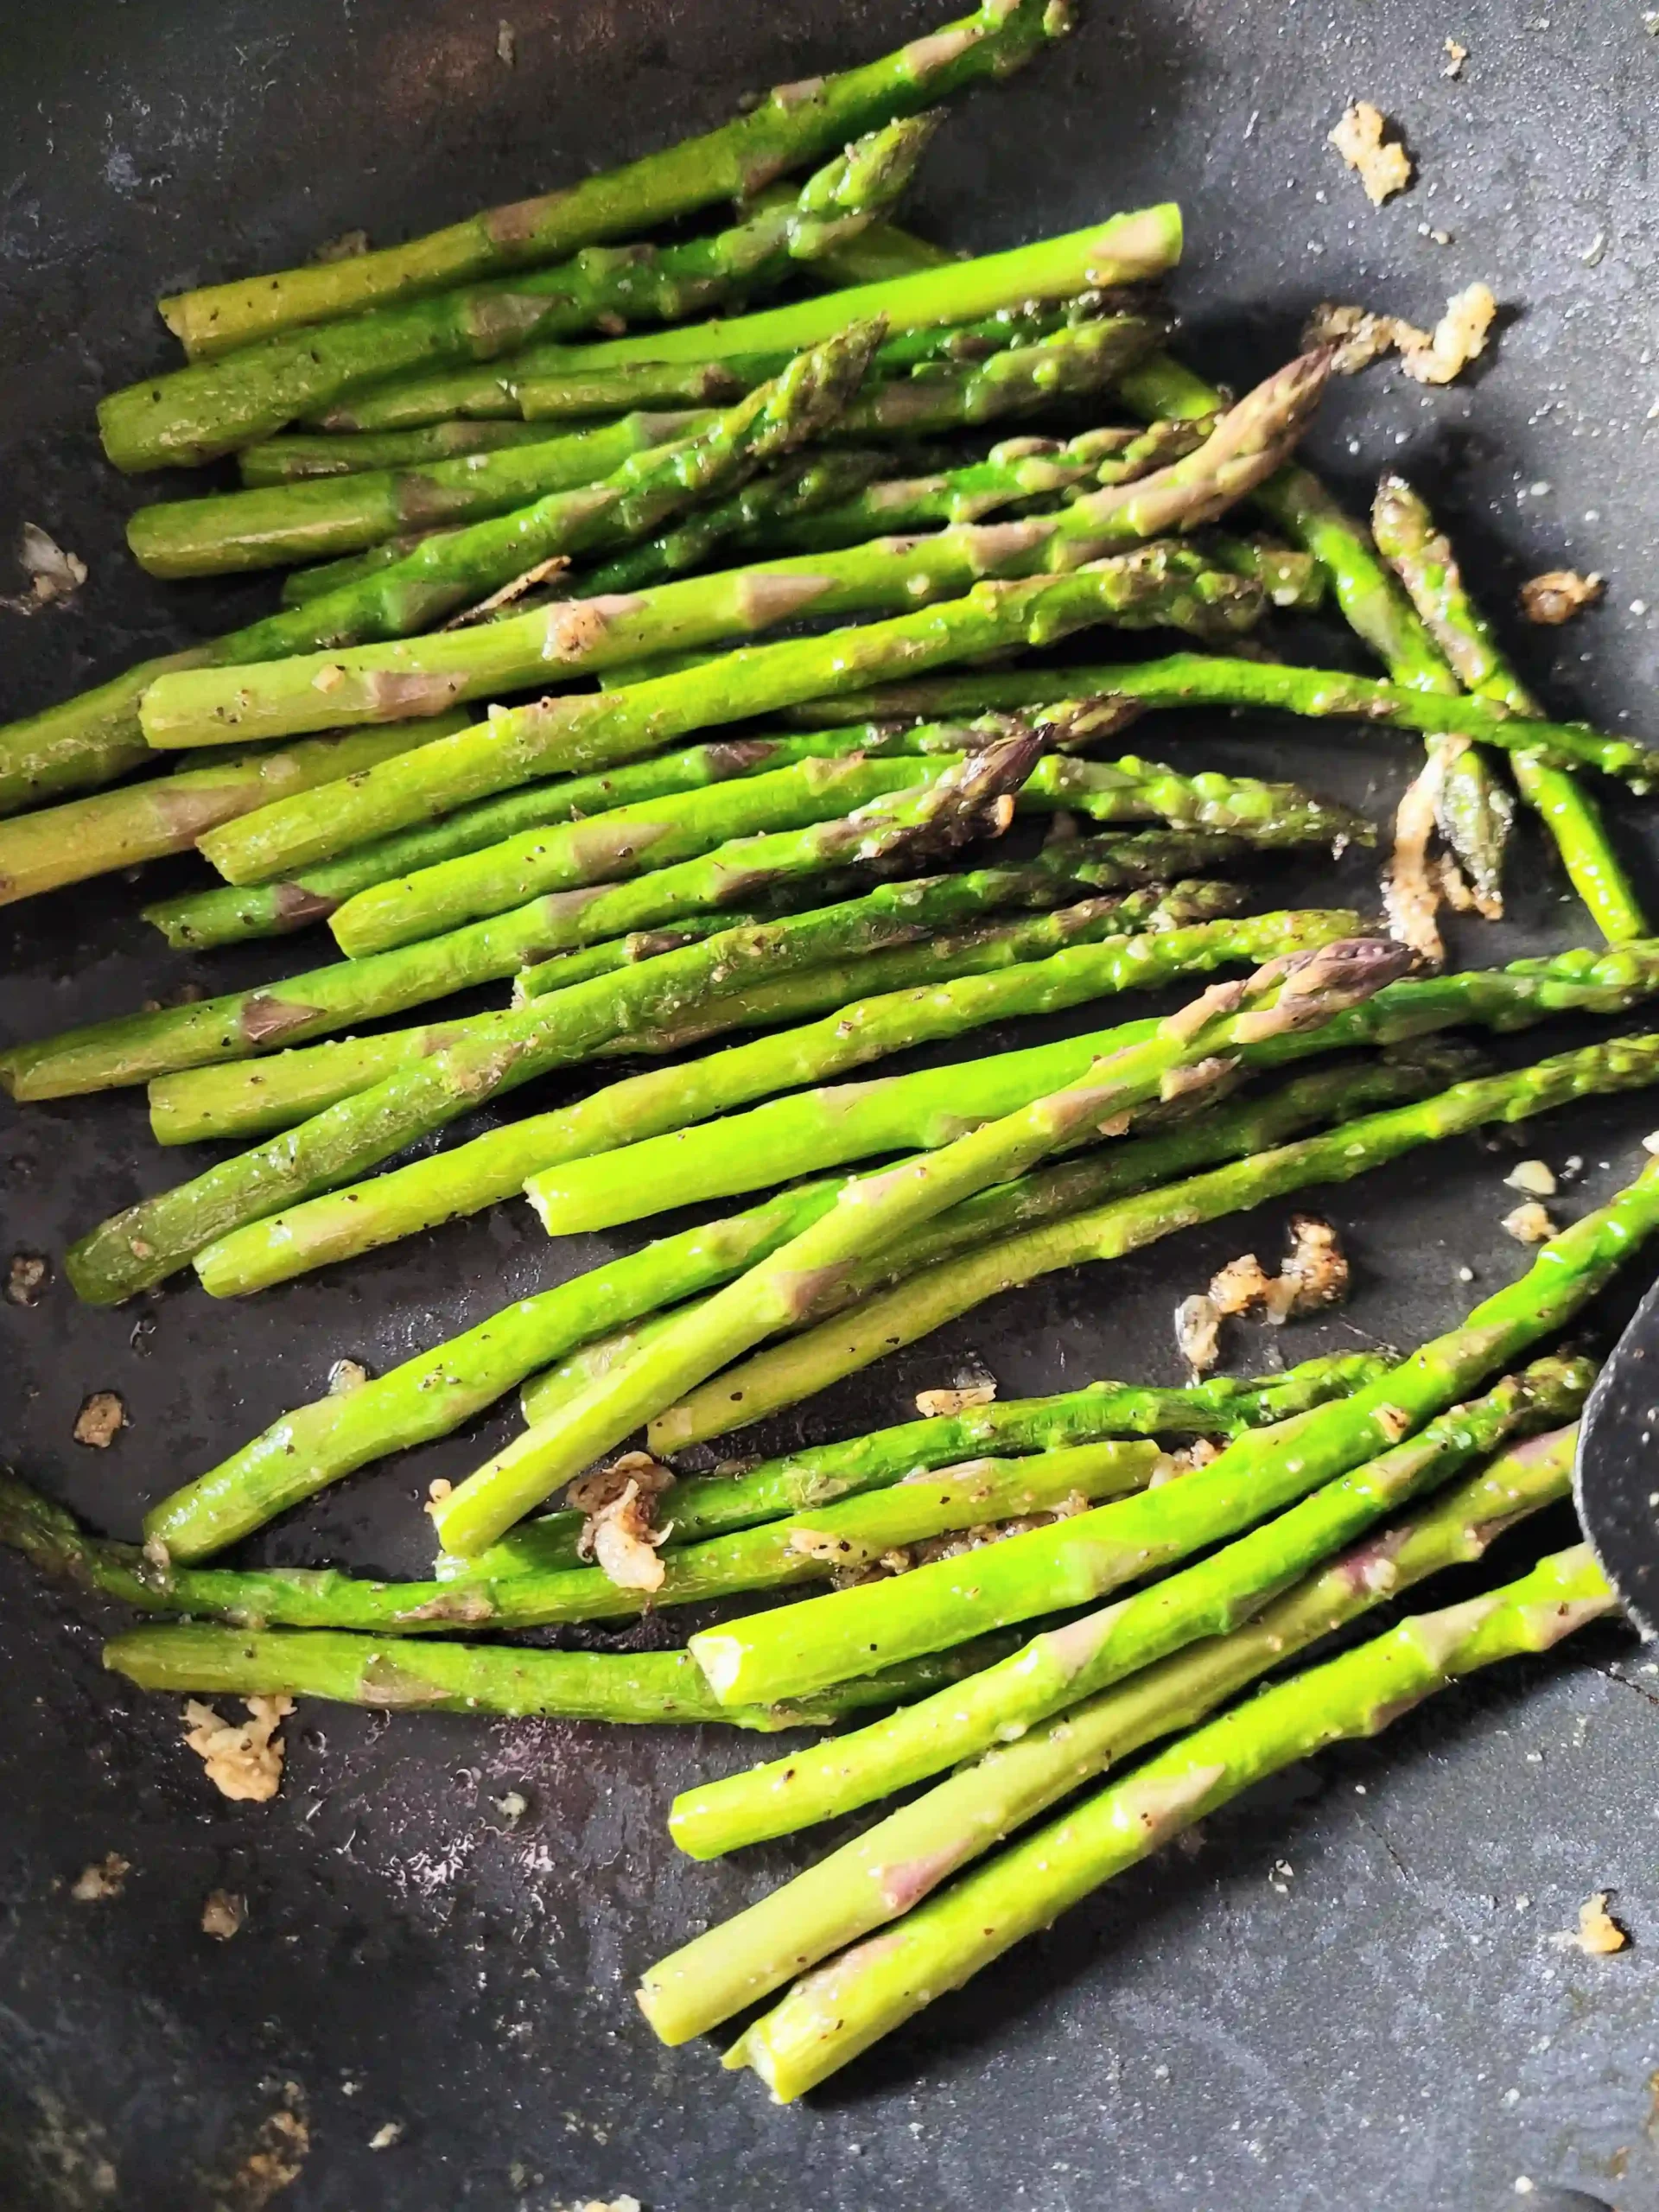 Fully cooked stovetop asparagus.